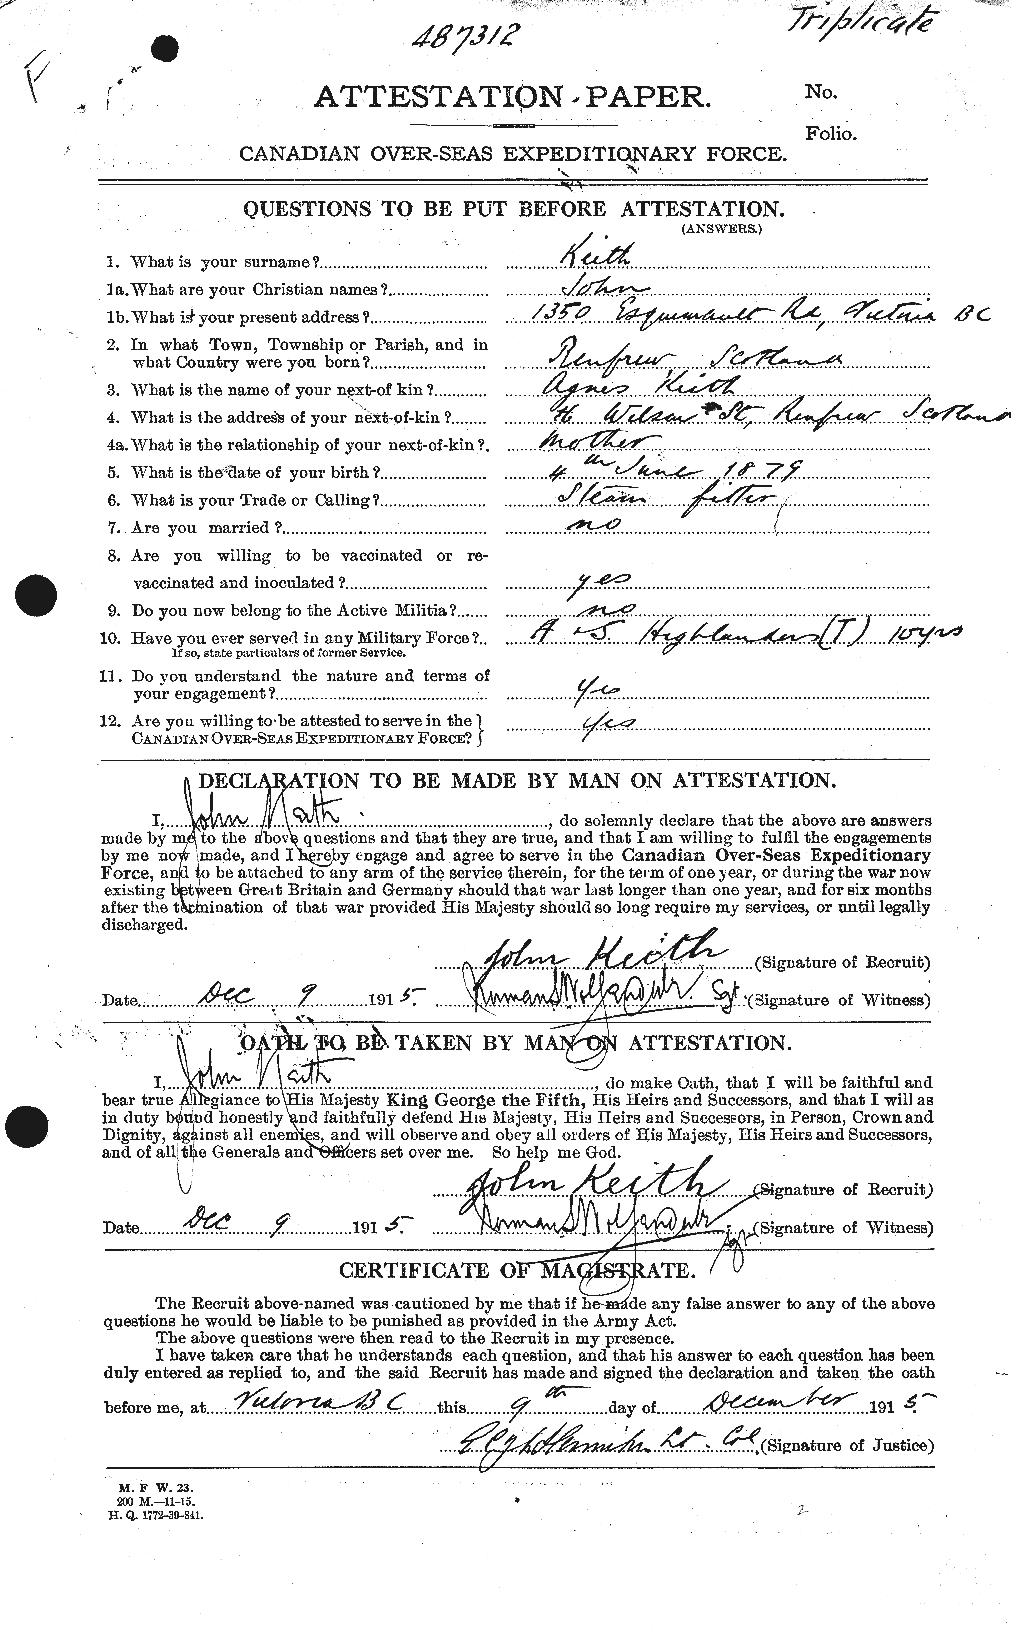 Personnel Records of the First World War - CEF 432465a